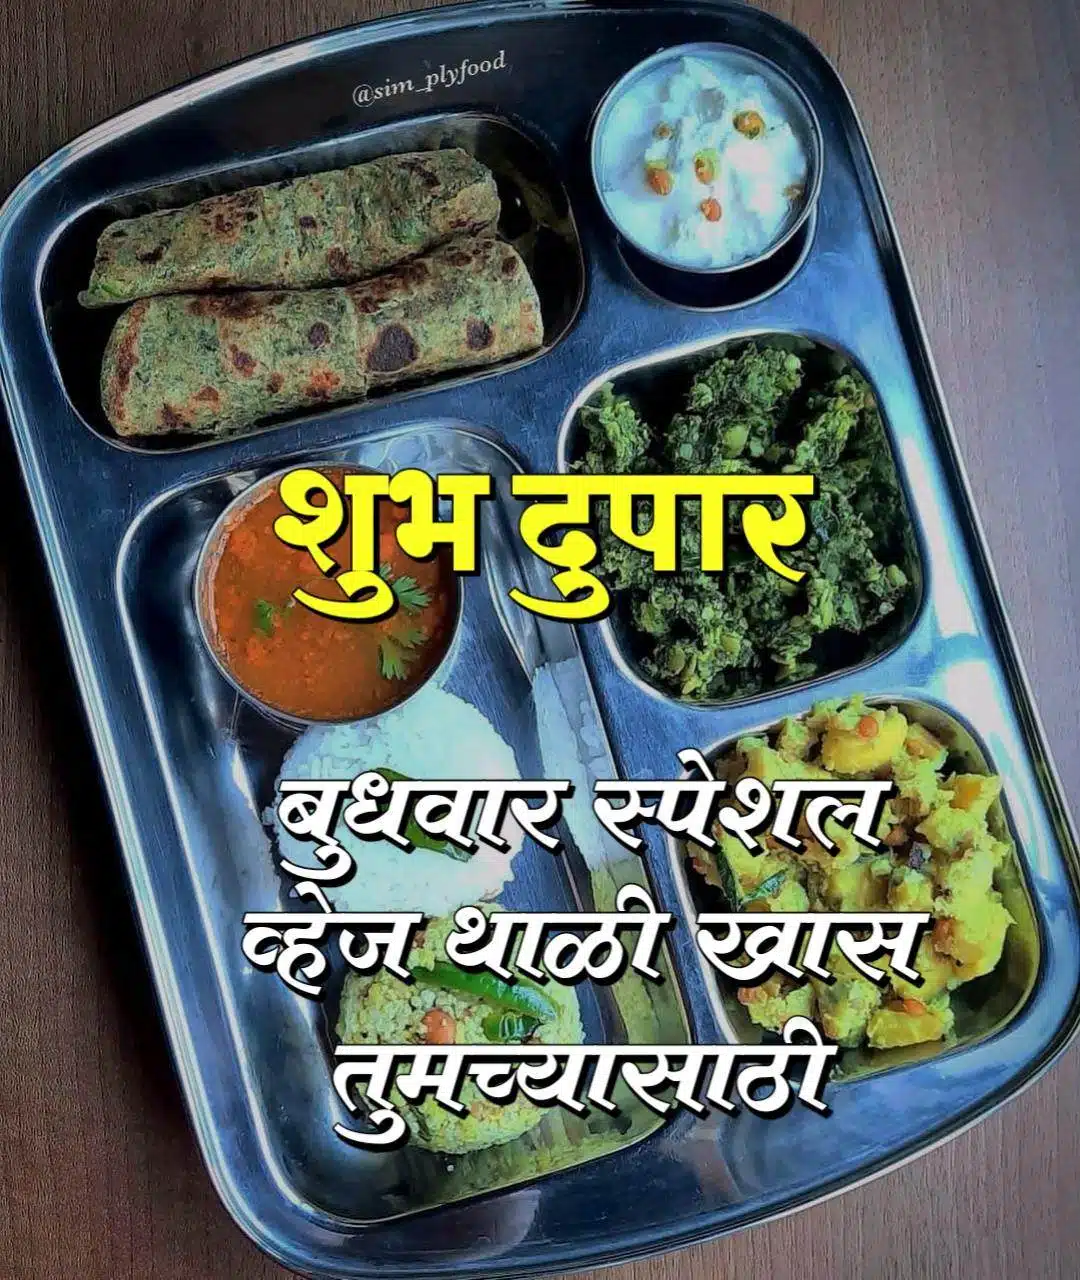 Lunch Good Afternoon In Marathi (13)